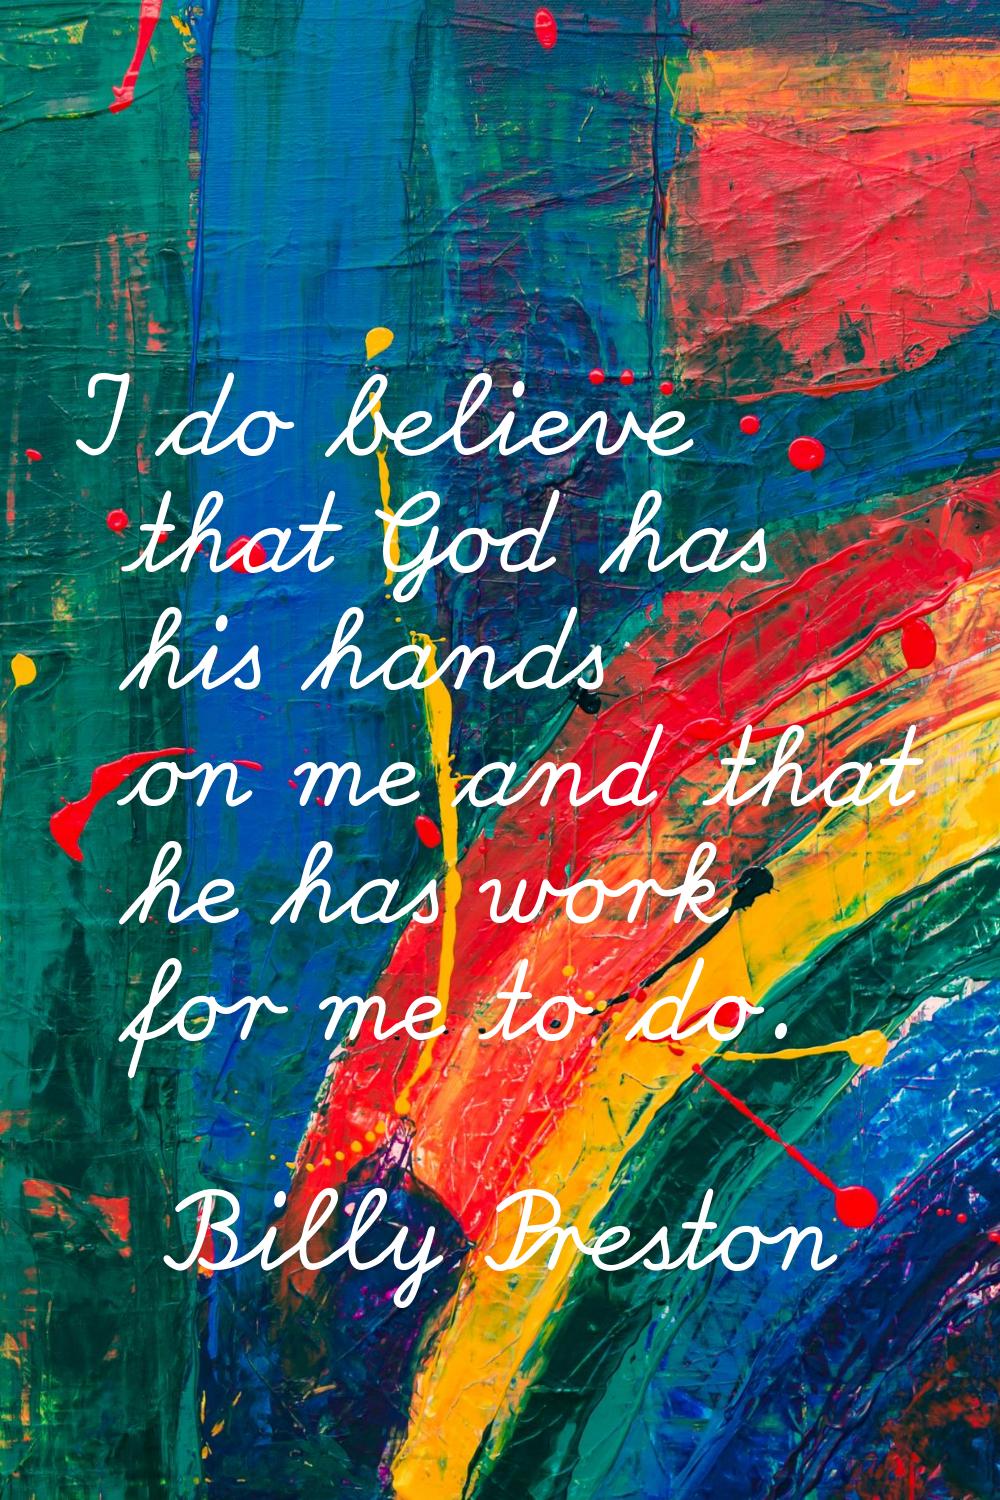 I do believe that God has his hands on me and that he has work for me to do.